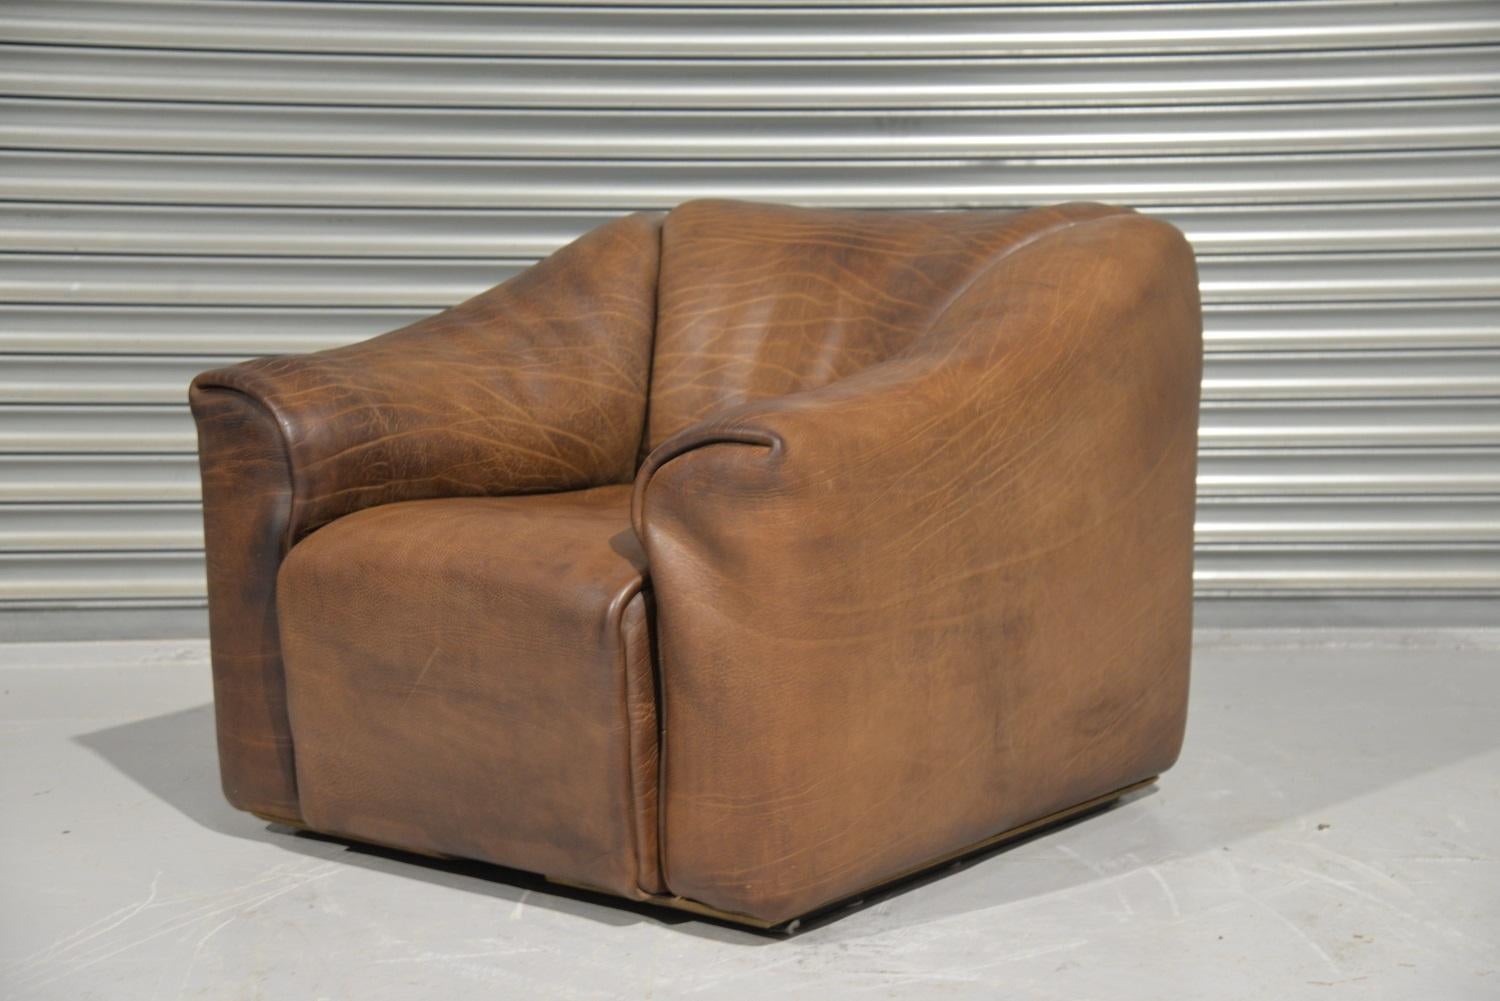 We are delighted to bring to you an ultra rare vintage De Sede DS 47 armchair. Hand built in the 1970s by De Sede craftsman in Switzerland, this piece is upholstered in thick natural buffalo neck leather with characterful folds. The leather is